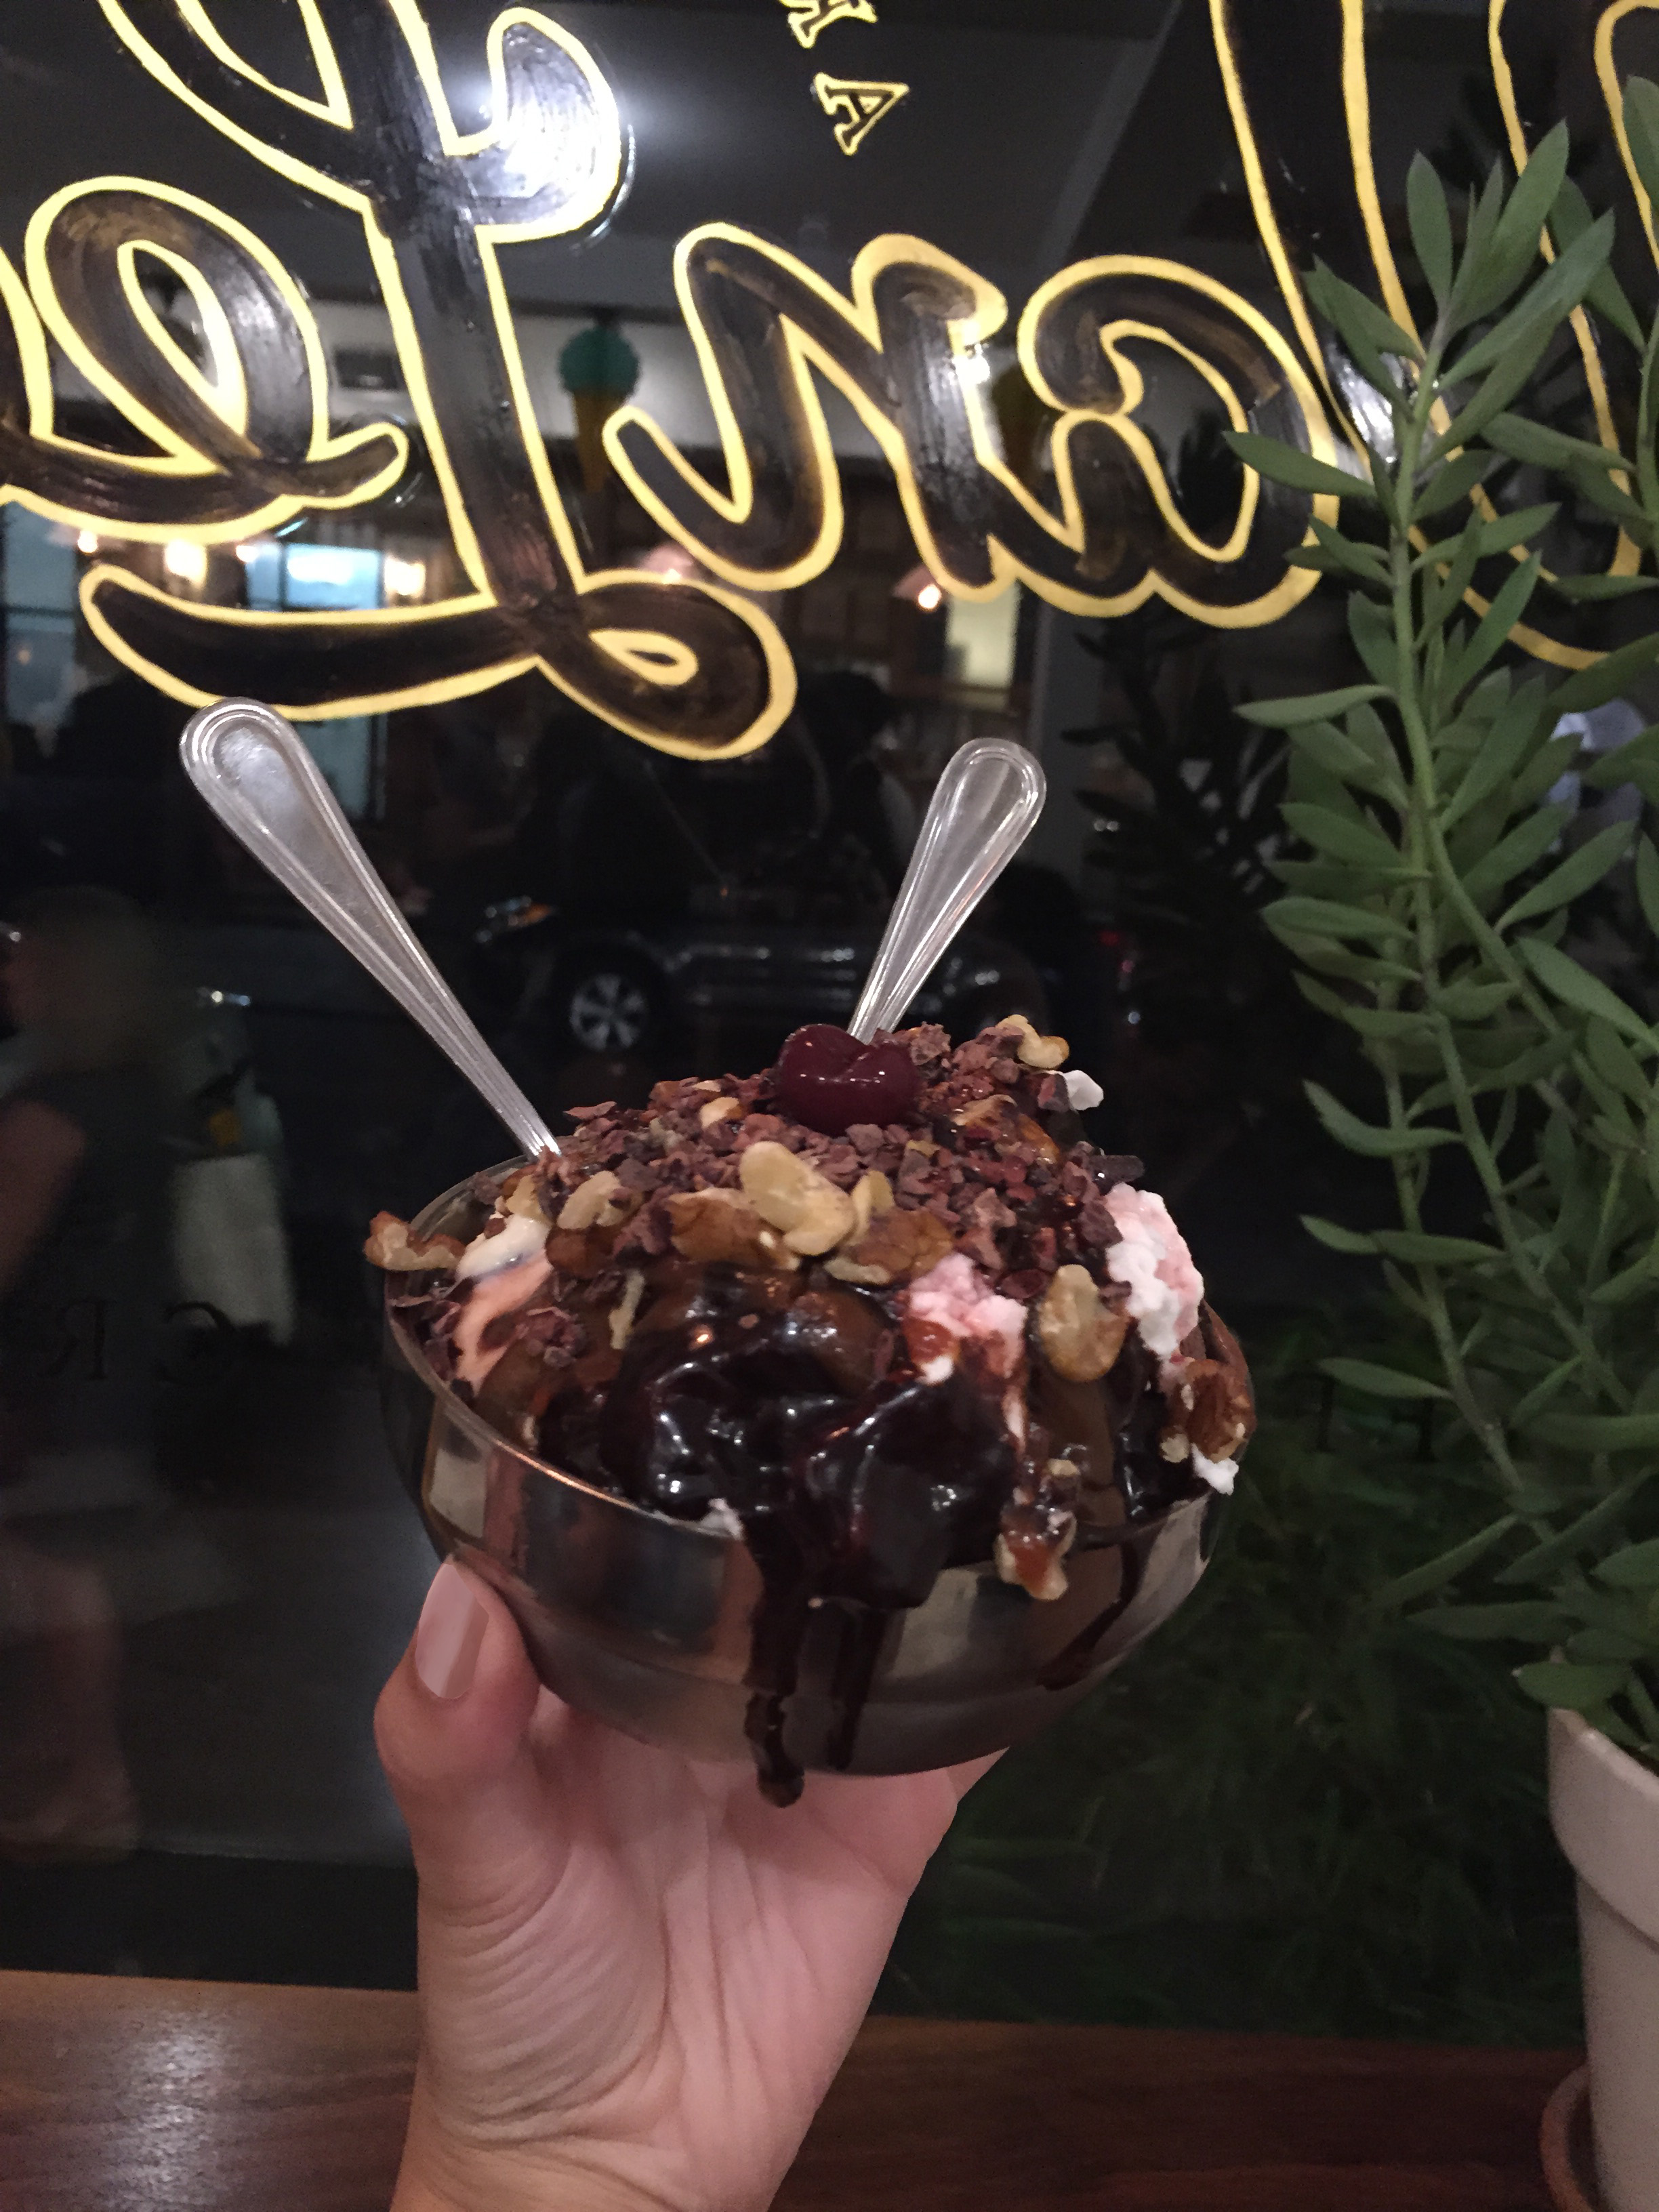 5. Van Leeuwen: What started in 2008 as a yellow truck on the streets of NYC, has expanded to include stores in NYC and LA and pints in grocery stores. Their homemade Classic and Vegan ice cream sundaes topped with cocoa nibs are to die for. 